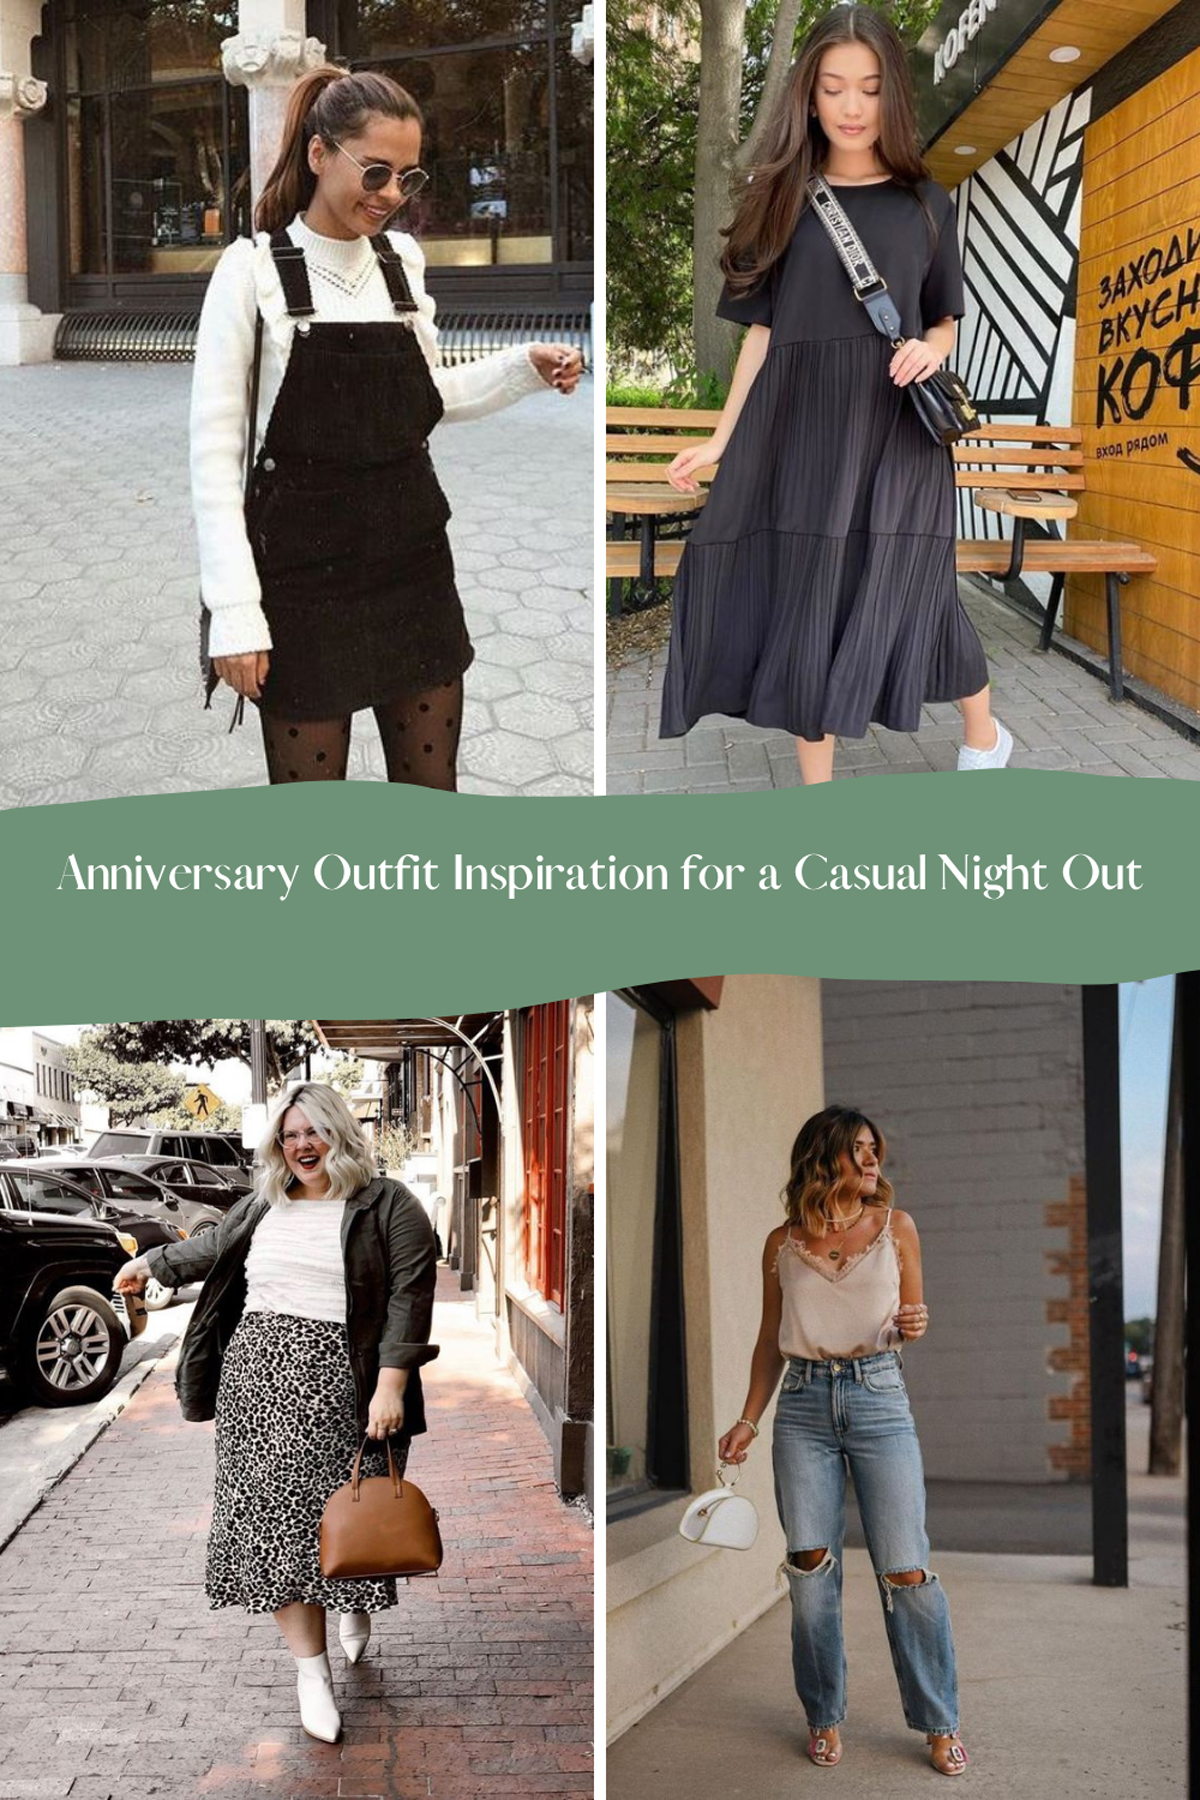 Cute Anniversary Outfits